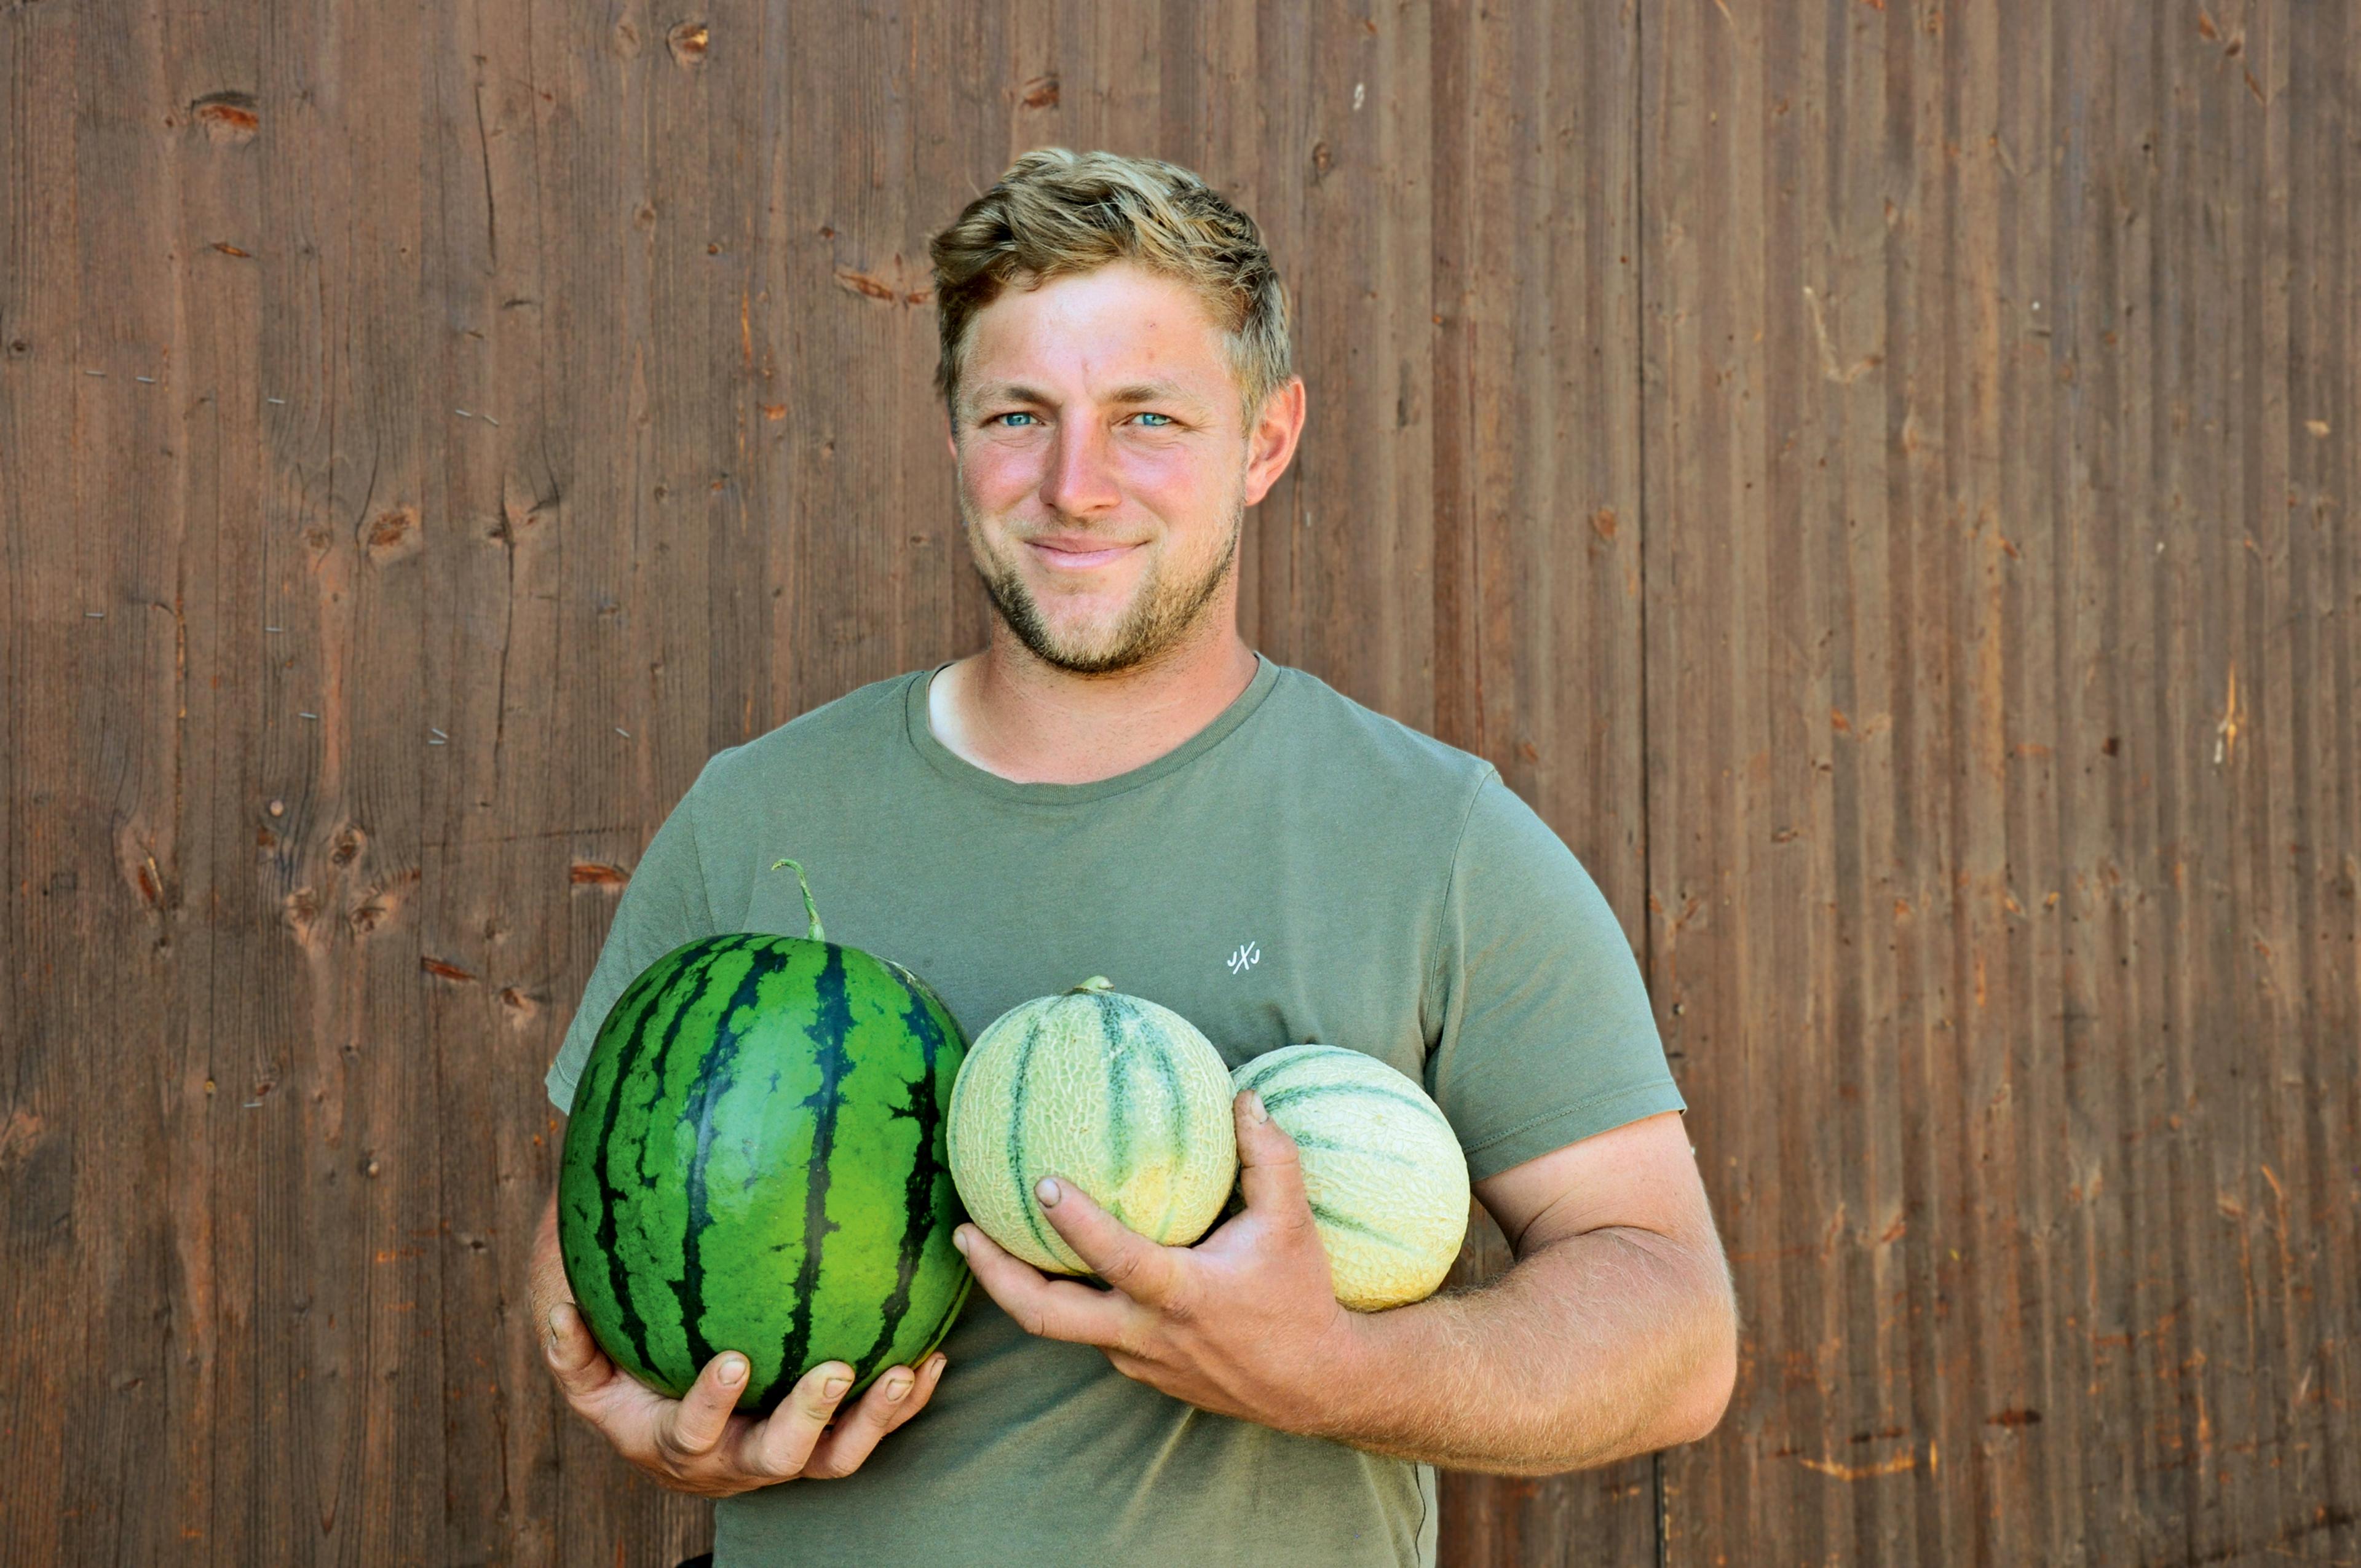 Successful experiment - Daniel Wilhalm has great success growing water and honeydew melons